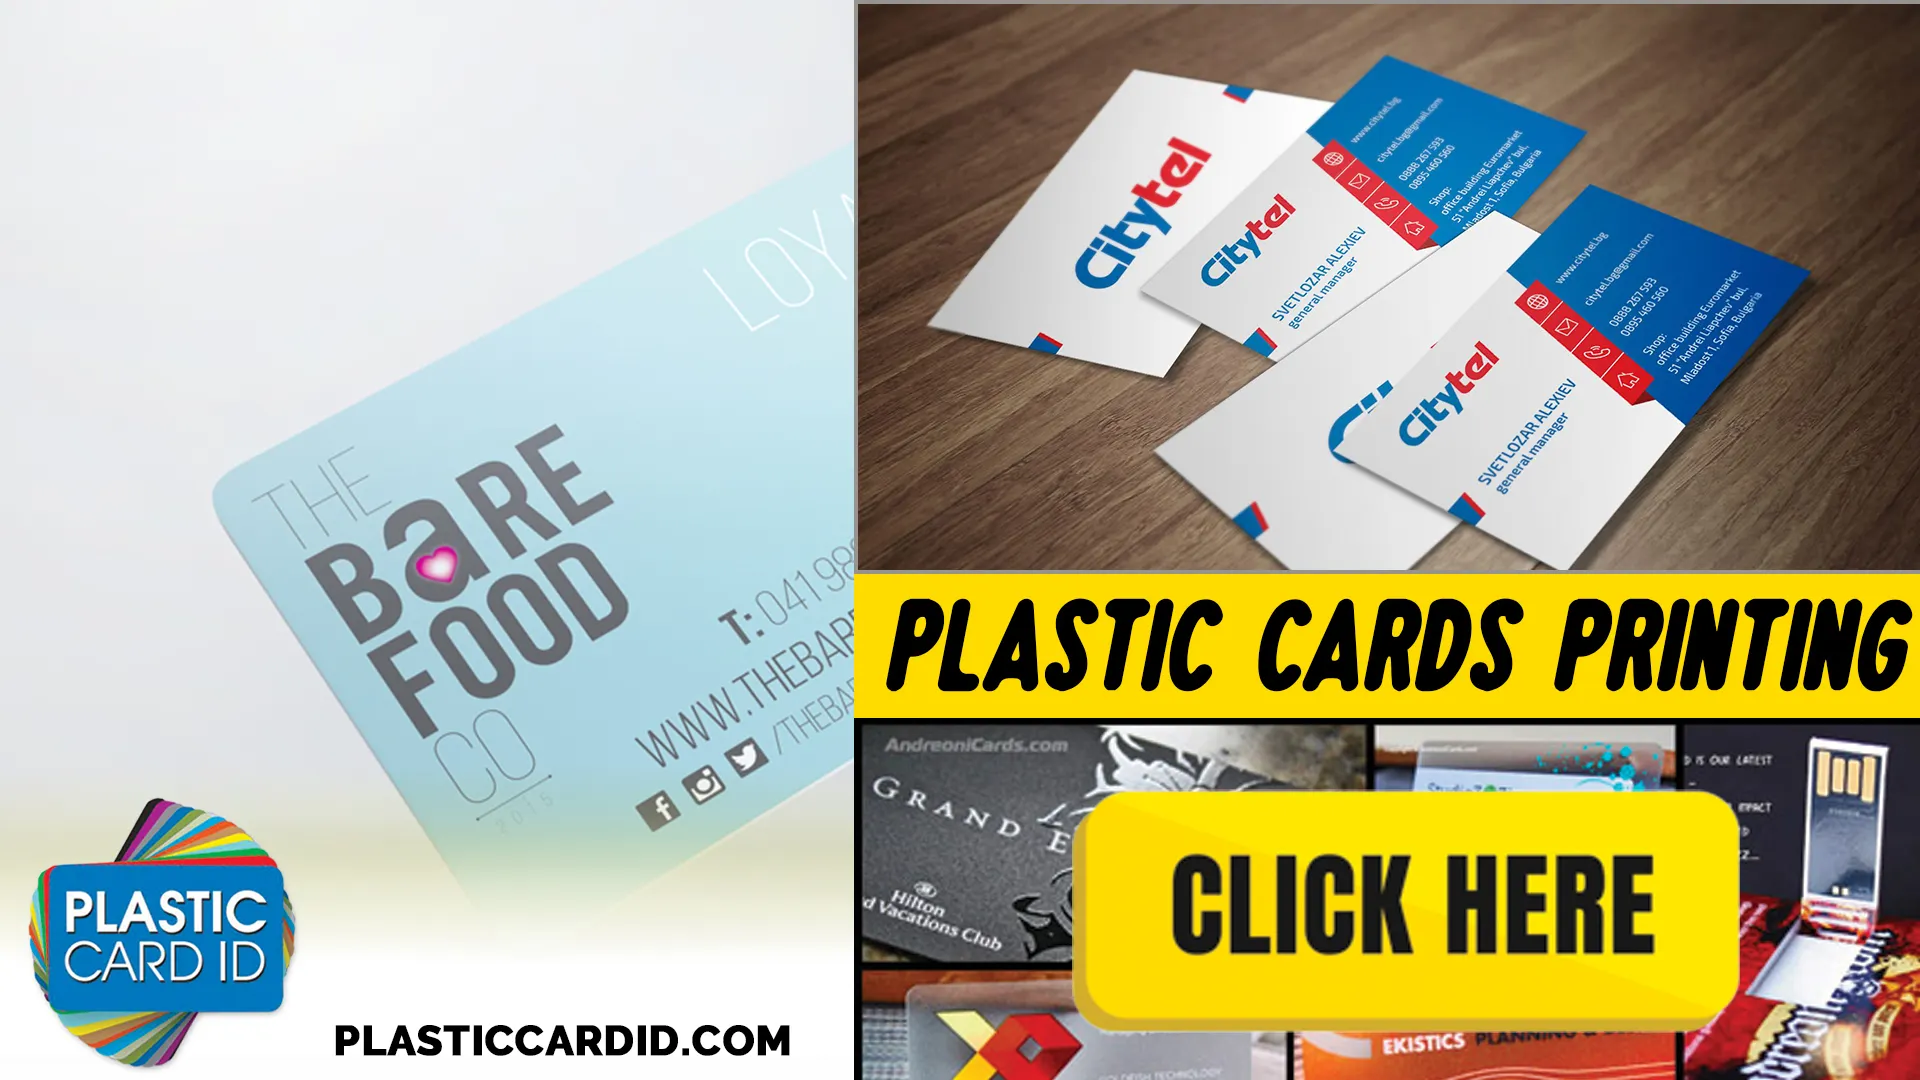 Welcome to Plastic Card ID




: Where Durability Meets Design